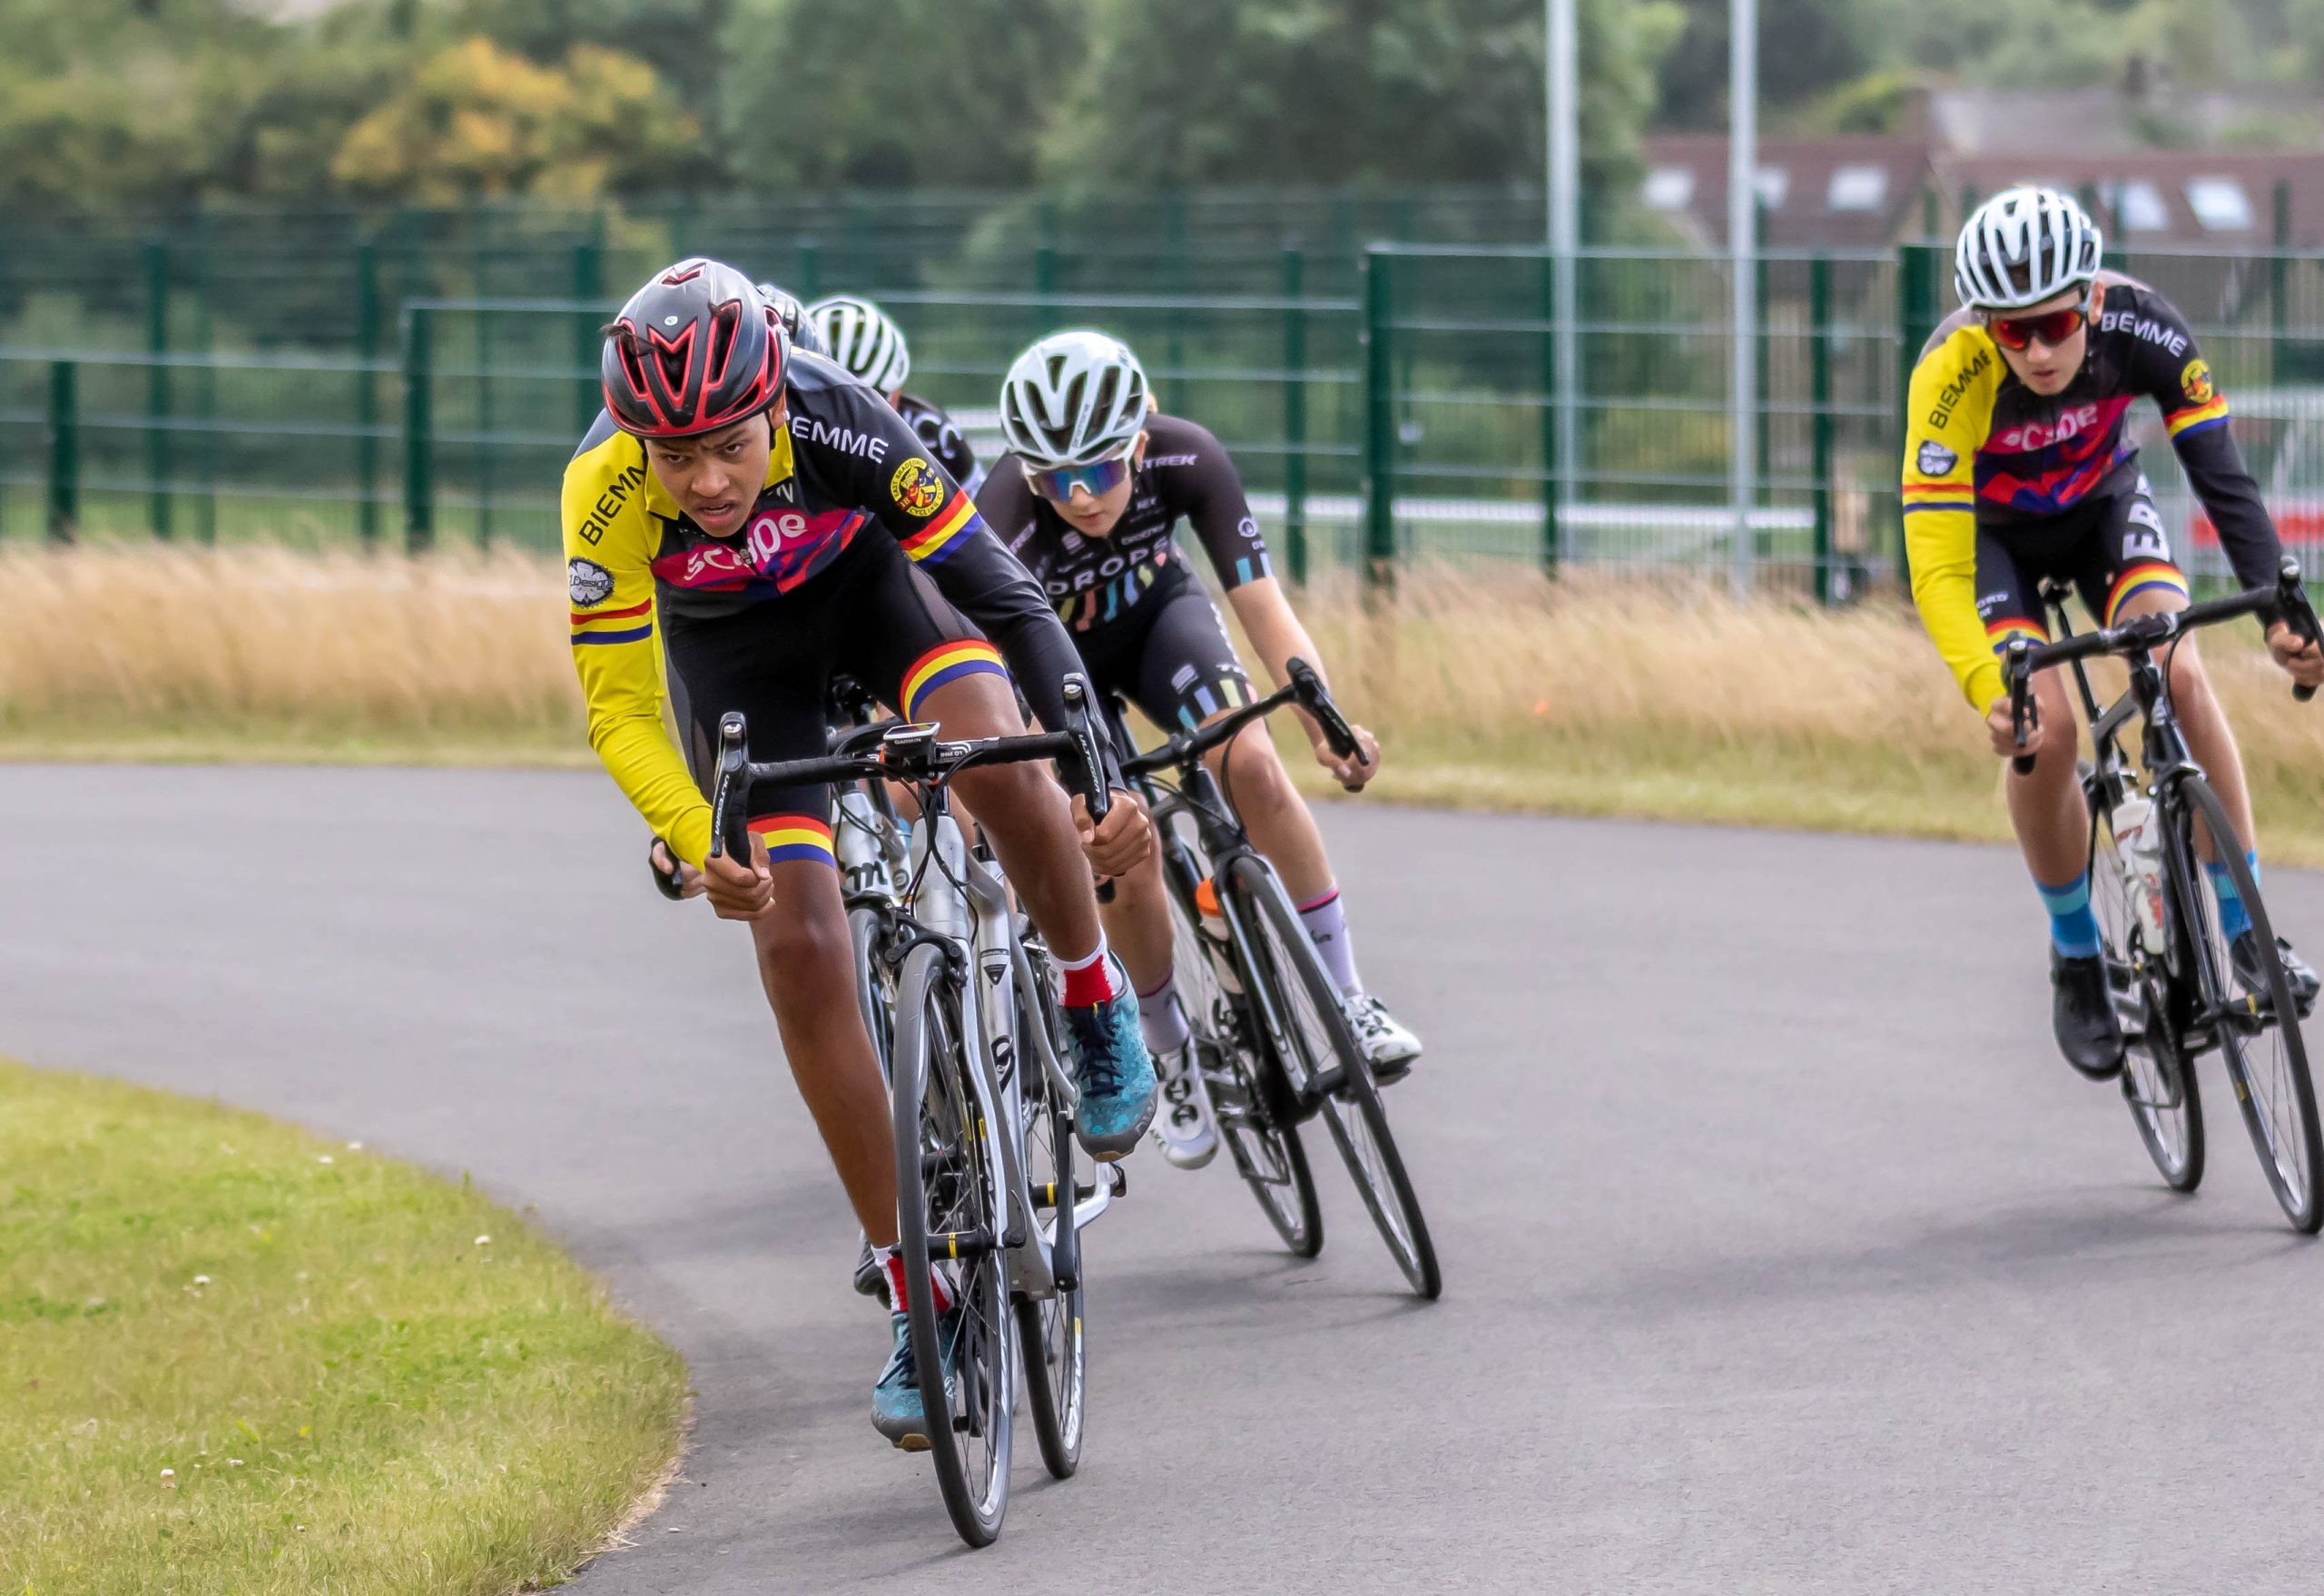 Cyclists in lycra and helmets competing in a cycle race